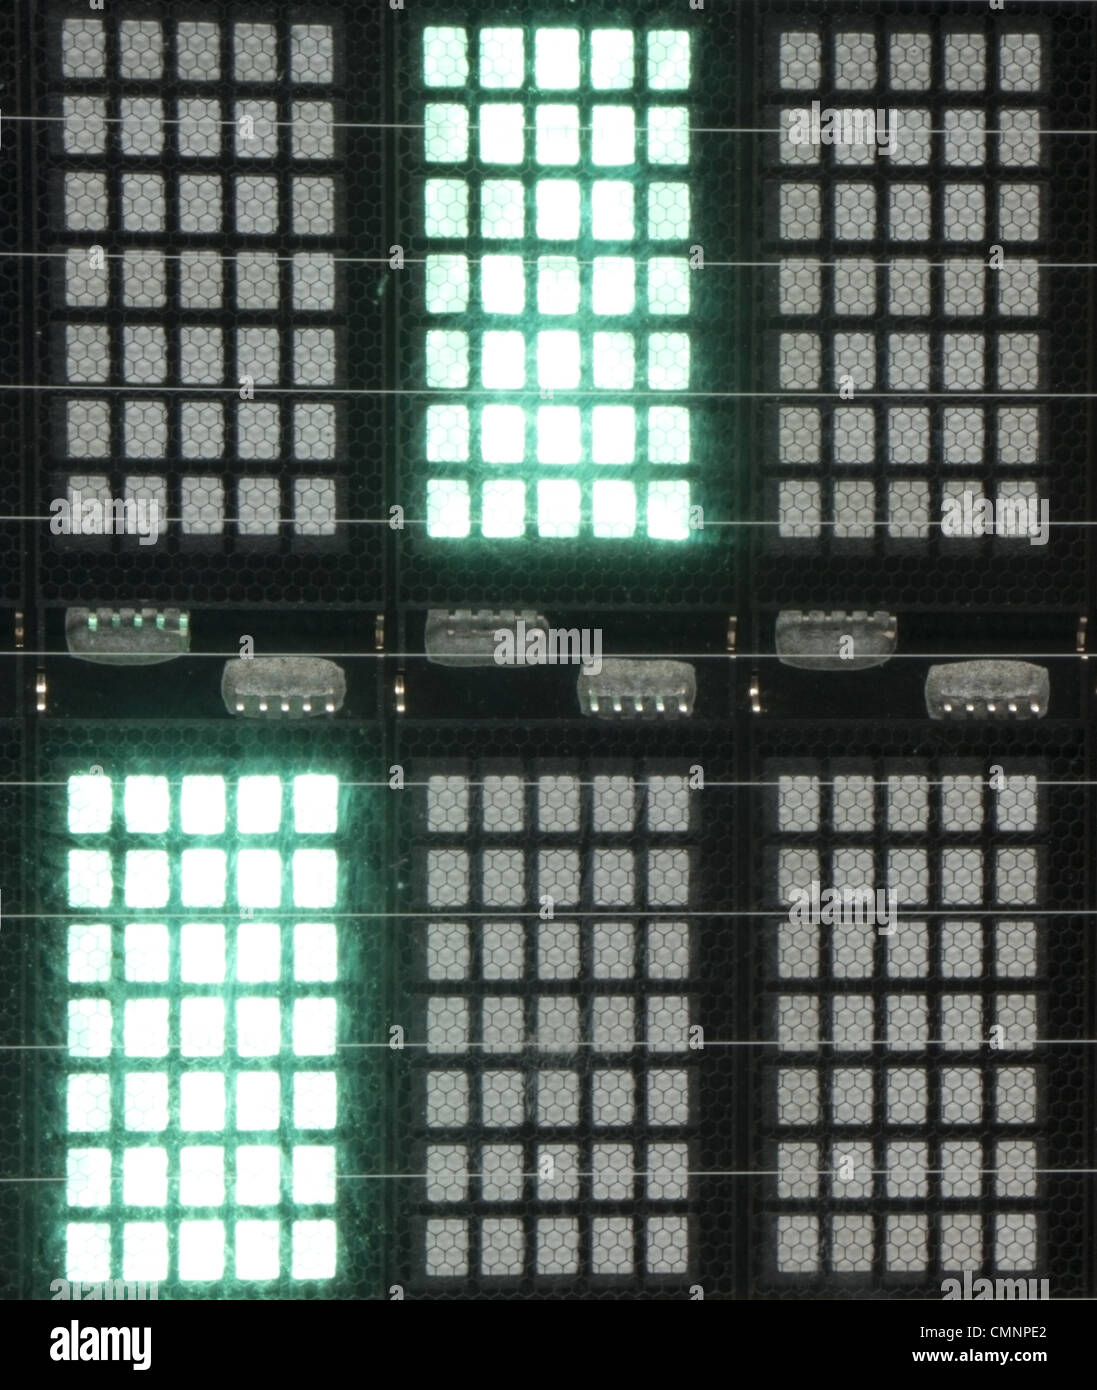 Macro shot of LED panel used on electronic tills and epos systems to display prices and totals Stock Photo